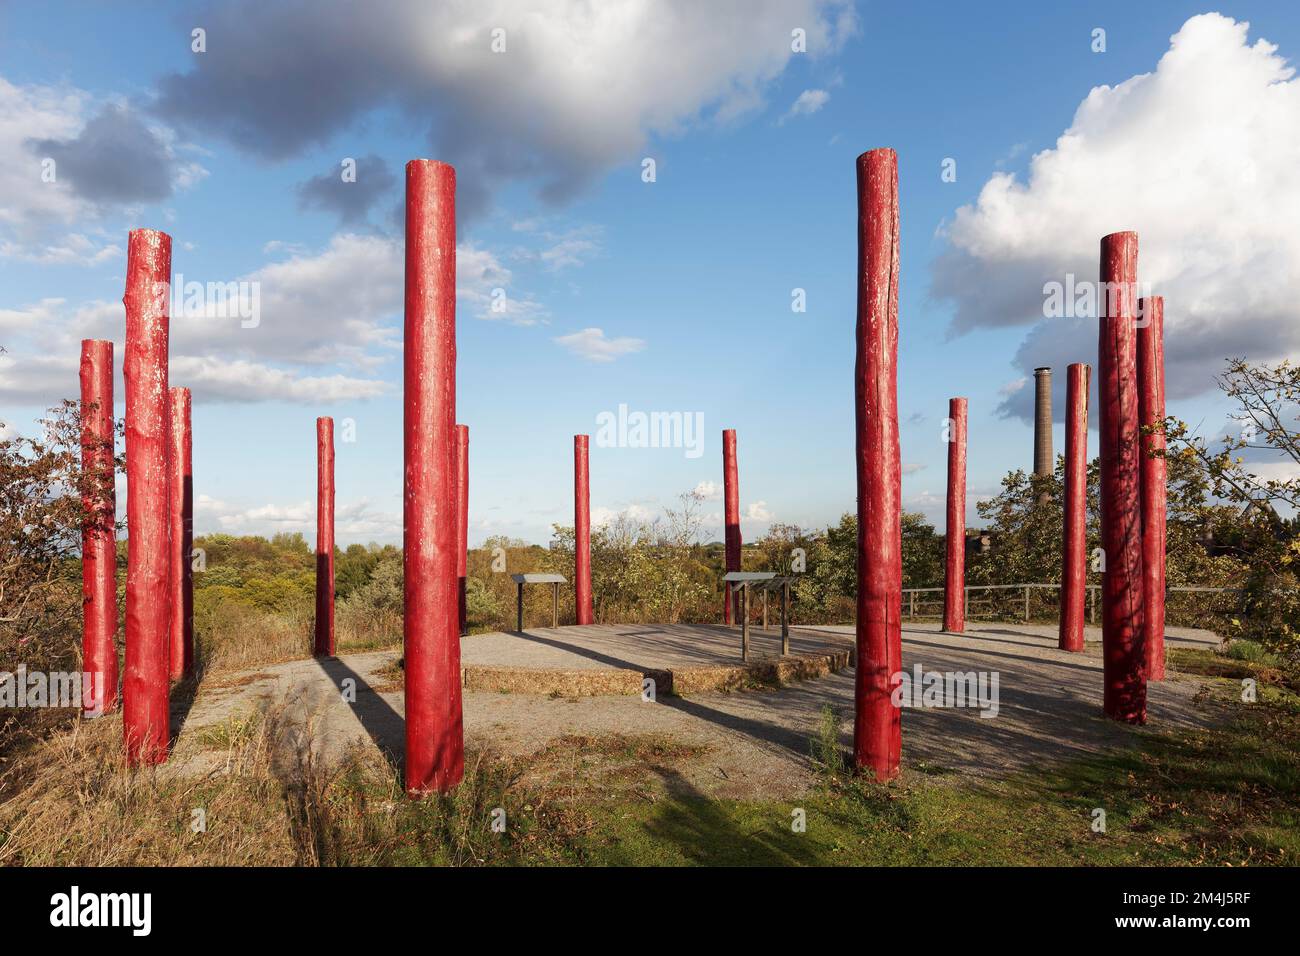 Viewpoint with art installation, Monte Schlacko, disused steelworks, Duisburg-Nord Landscape Park, Duisburg-Meiderich, North Rhine-Westphalia, Germany Stock Photo